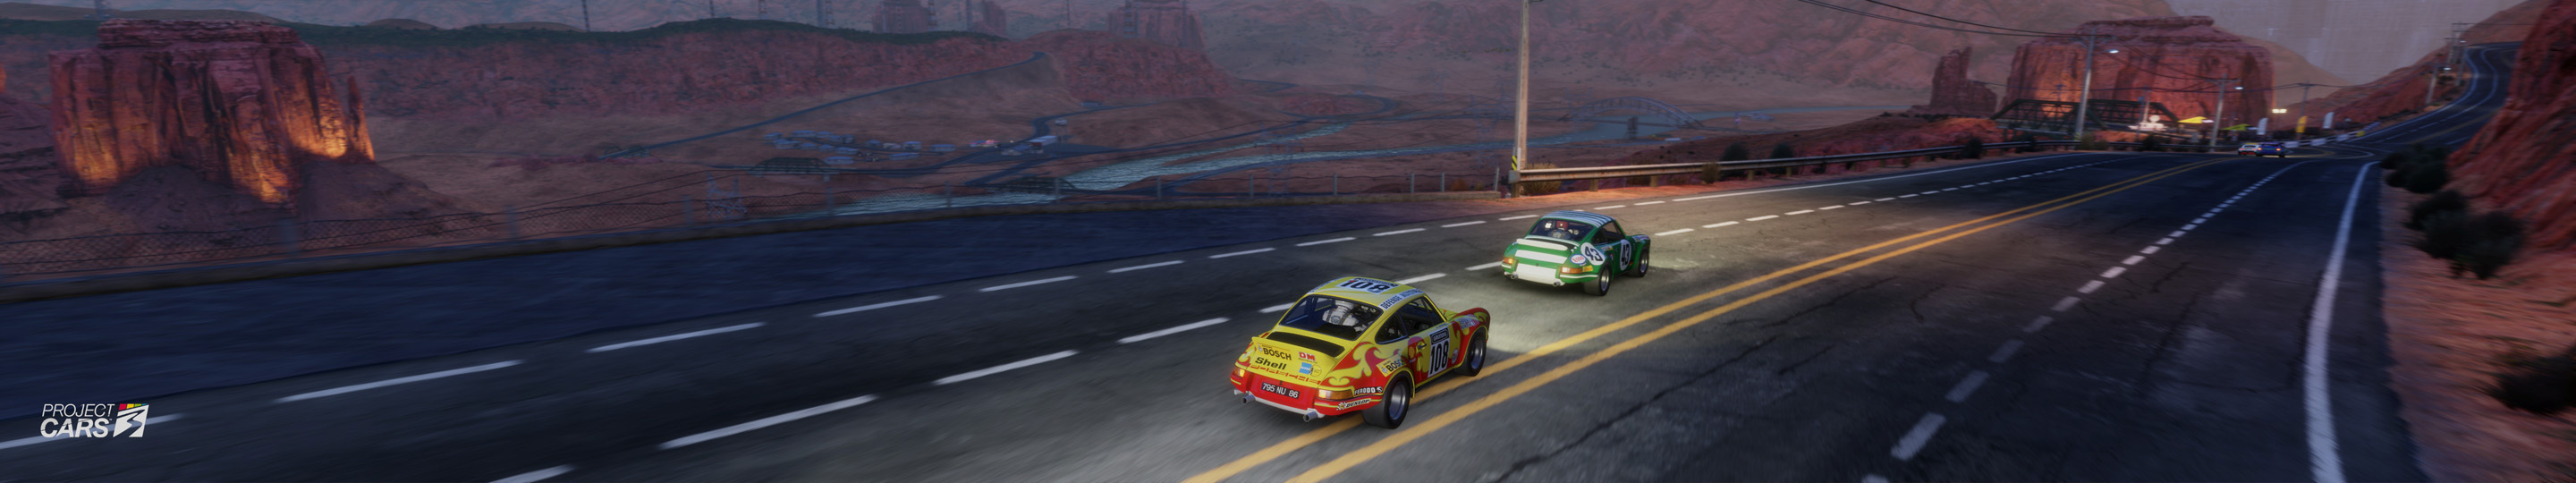 00 PROJECT CARS 3 MONUMENT CANYON with PIR RANGE CARS copy.jpg